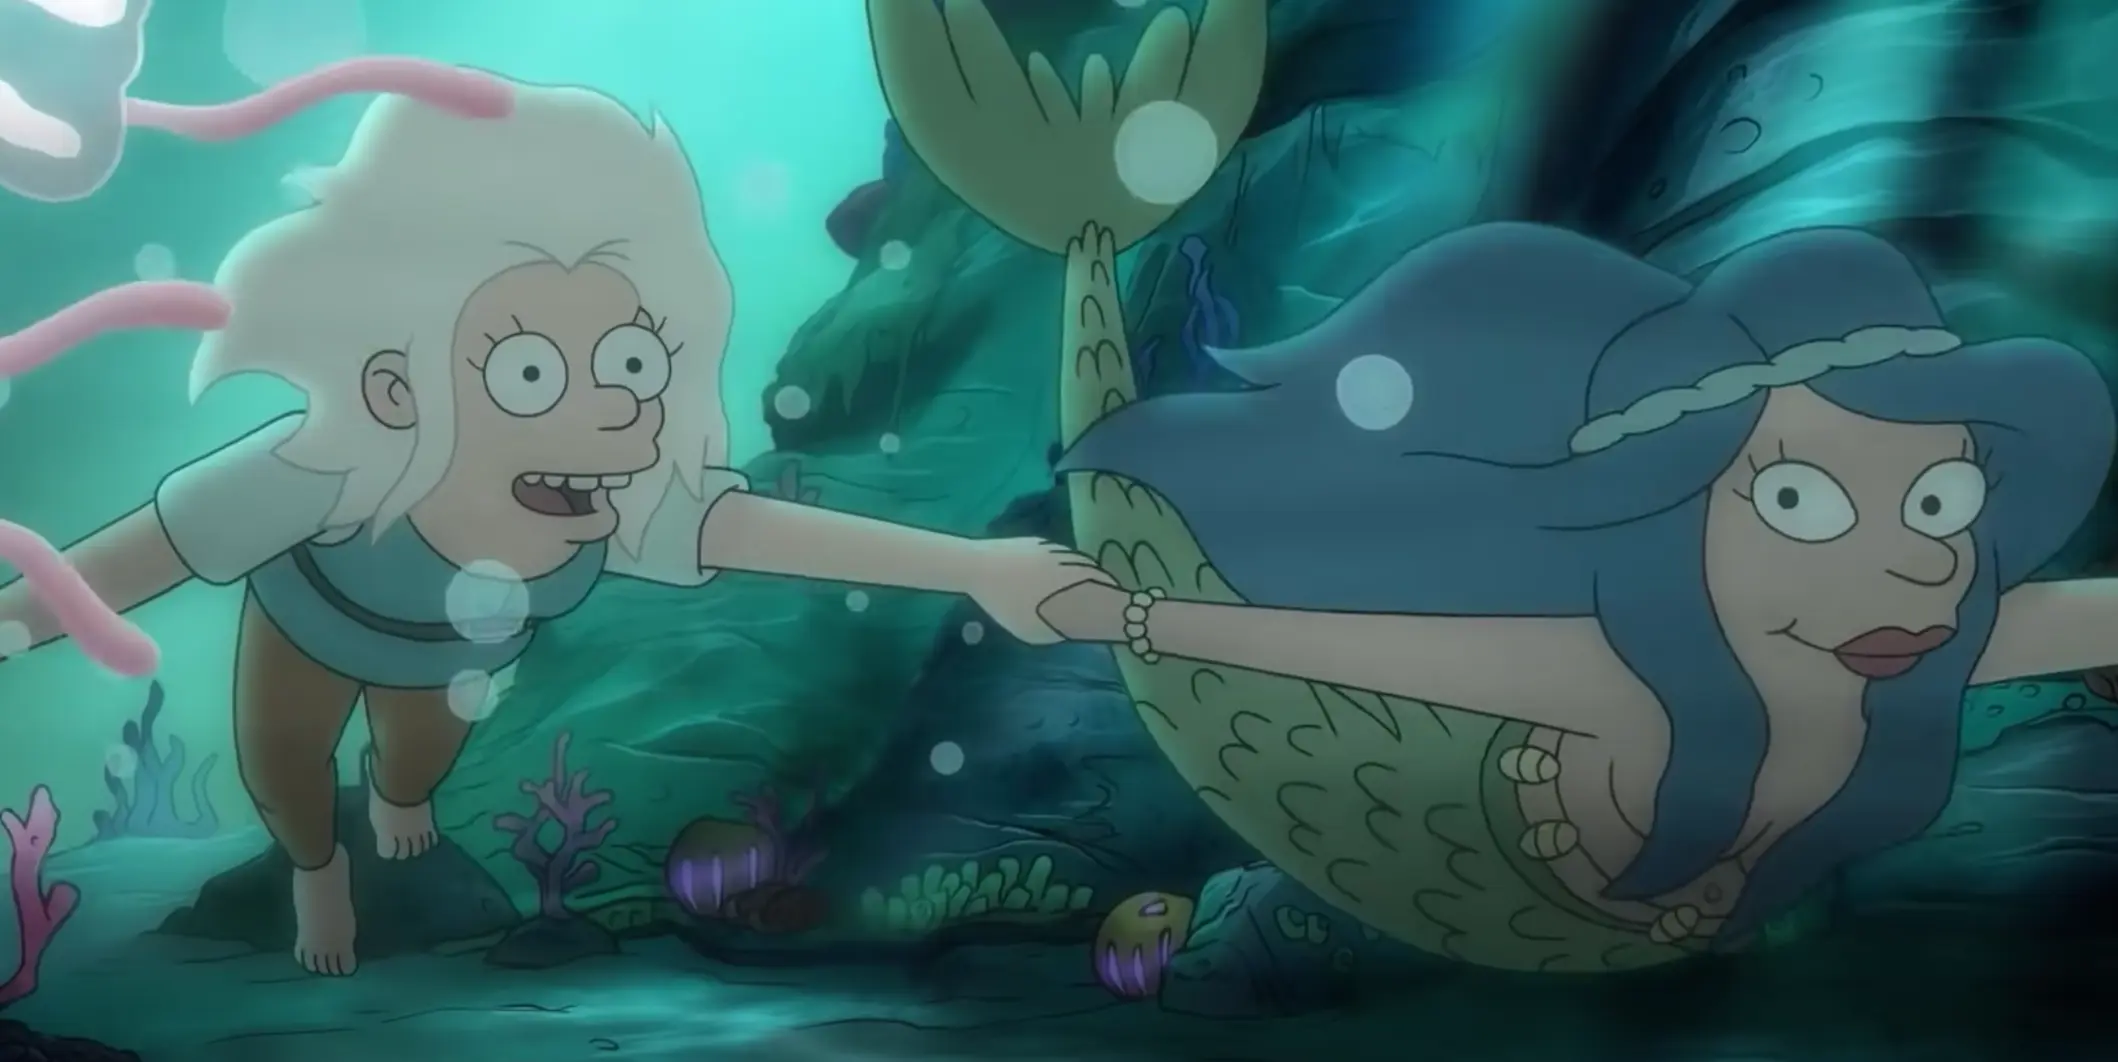 Image of the mermaid Mora leading Princess Bean under the water while smiling and looking at eachother.